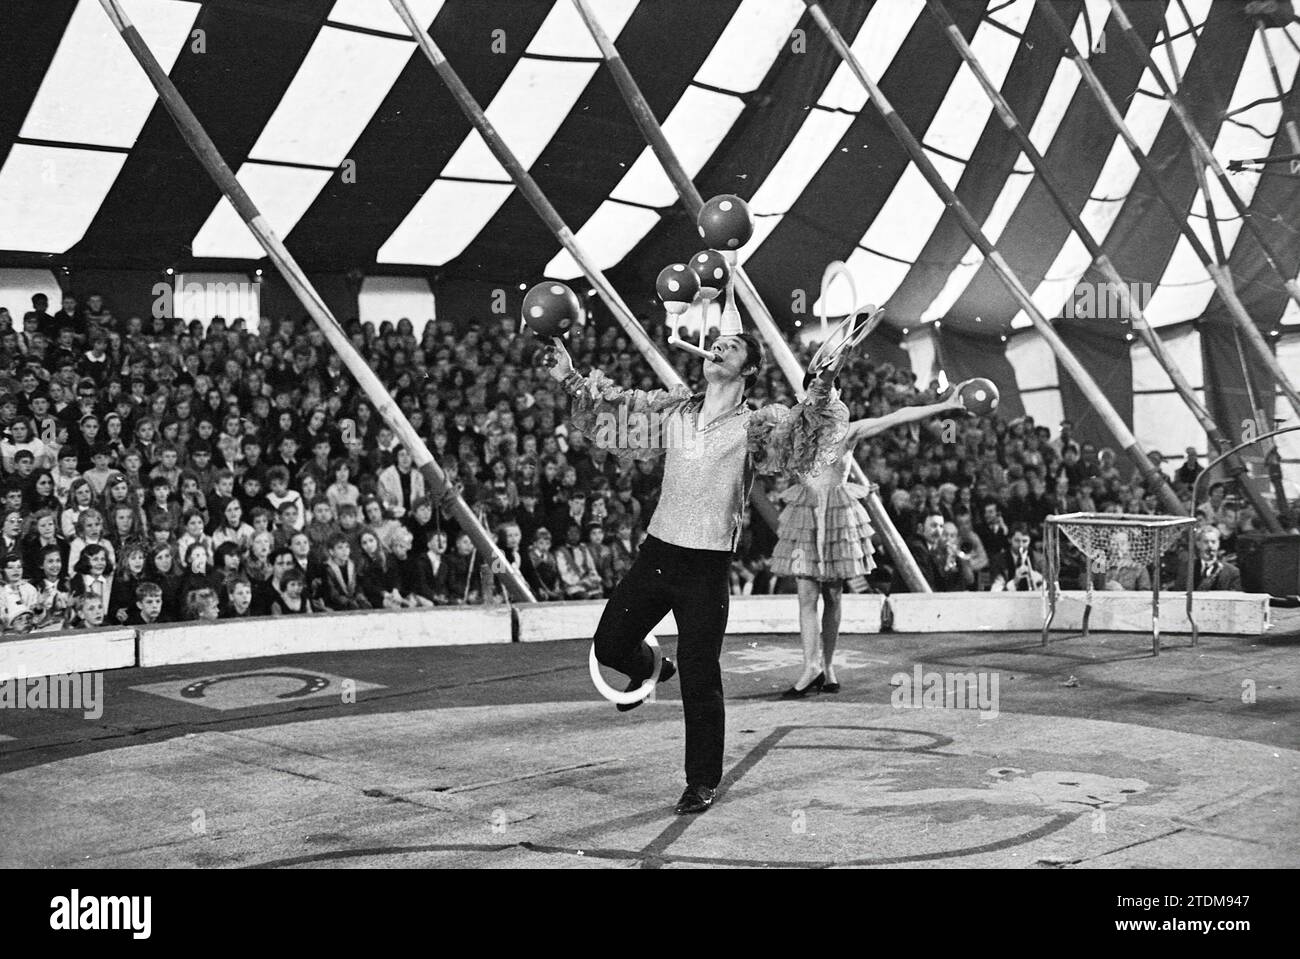 Circus, Whizgle News from the Past, Tailored for the Future. Explore historical narratives, Dutch The Netherlands agency image with a modern perspective, bridging the gap between yesterday's events and tomorrow's insights. A timeless journey shaping the stories that shape our future Stock Photo